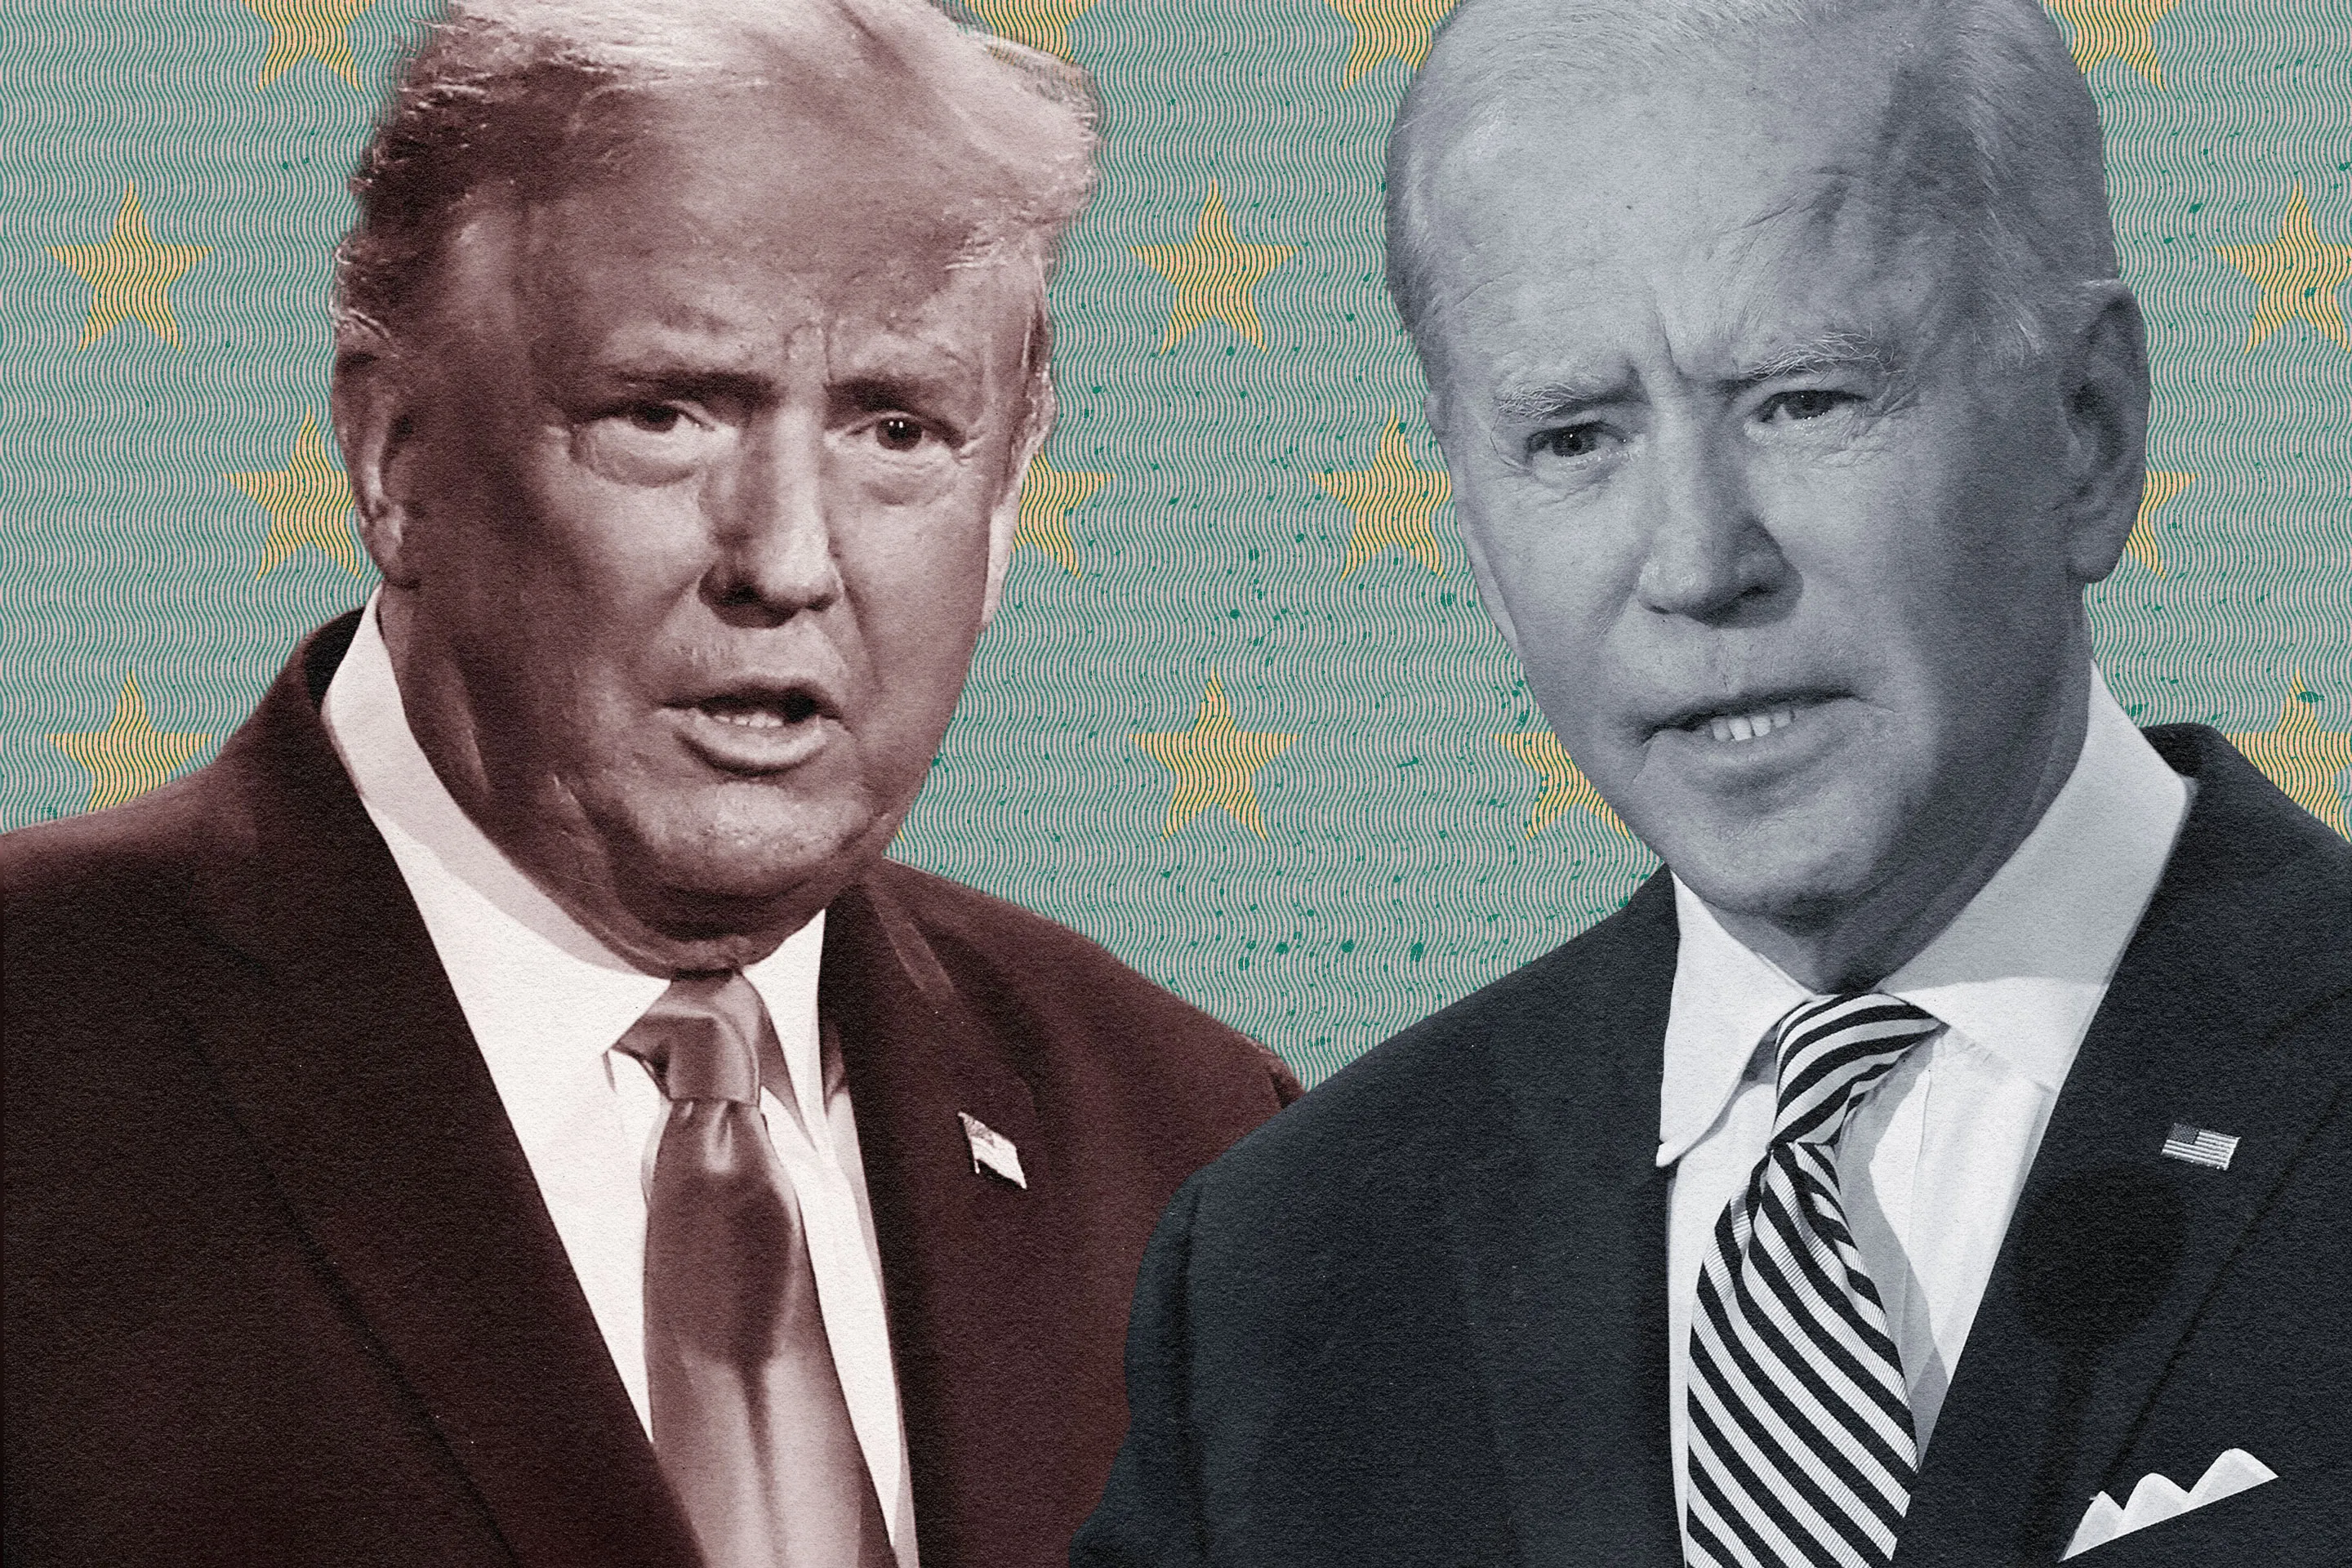 Election Day 2020 and Your Money: Trump vs. Biden on 401(k)s, Taxes and Other Key Issues